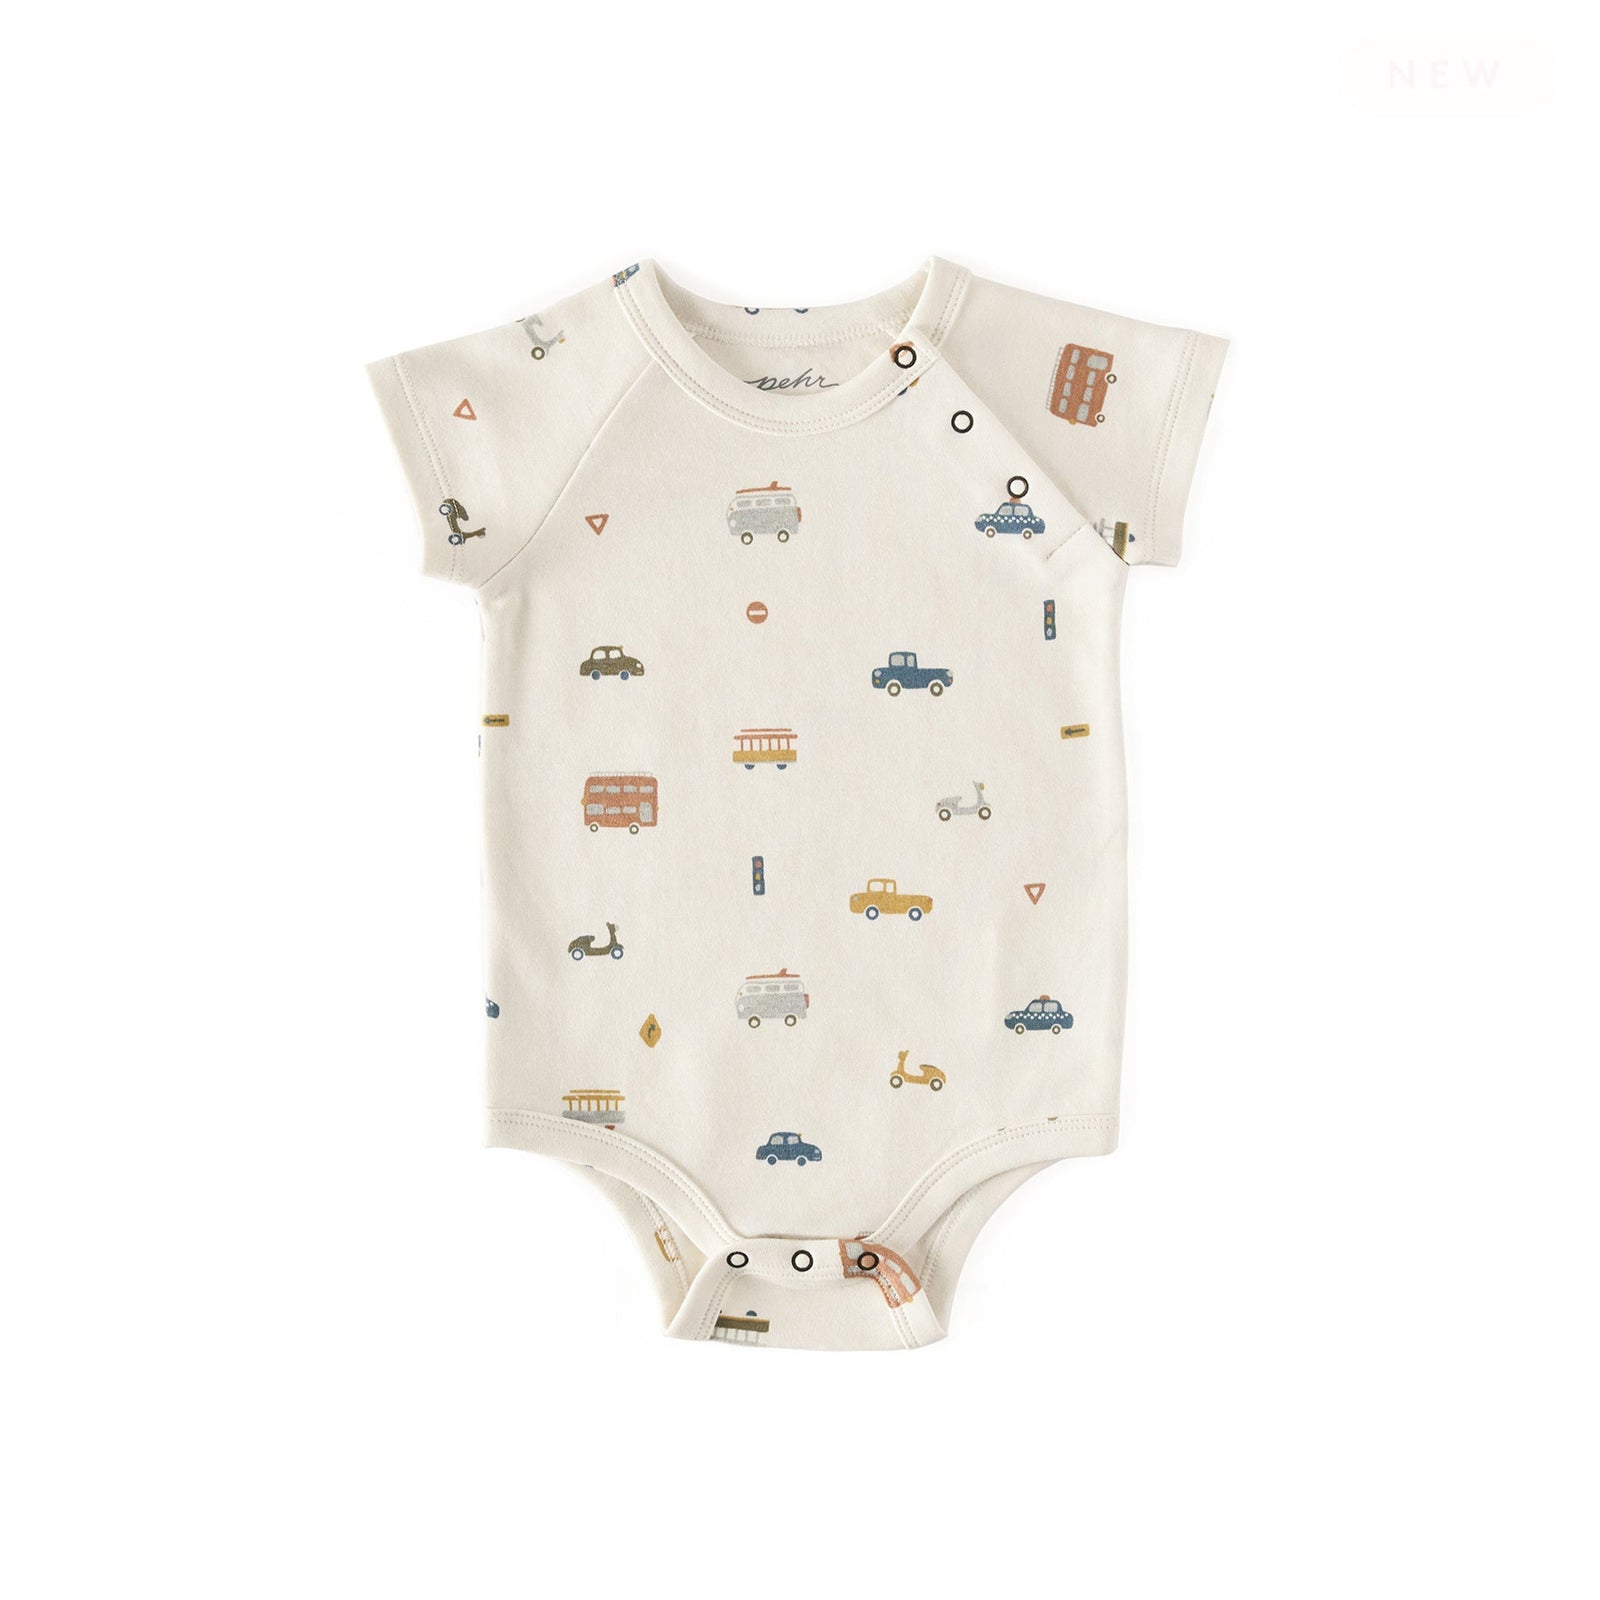 Snap One-Piece One-Piece Pehr Rush Hour 3 - 6 mos. 